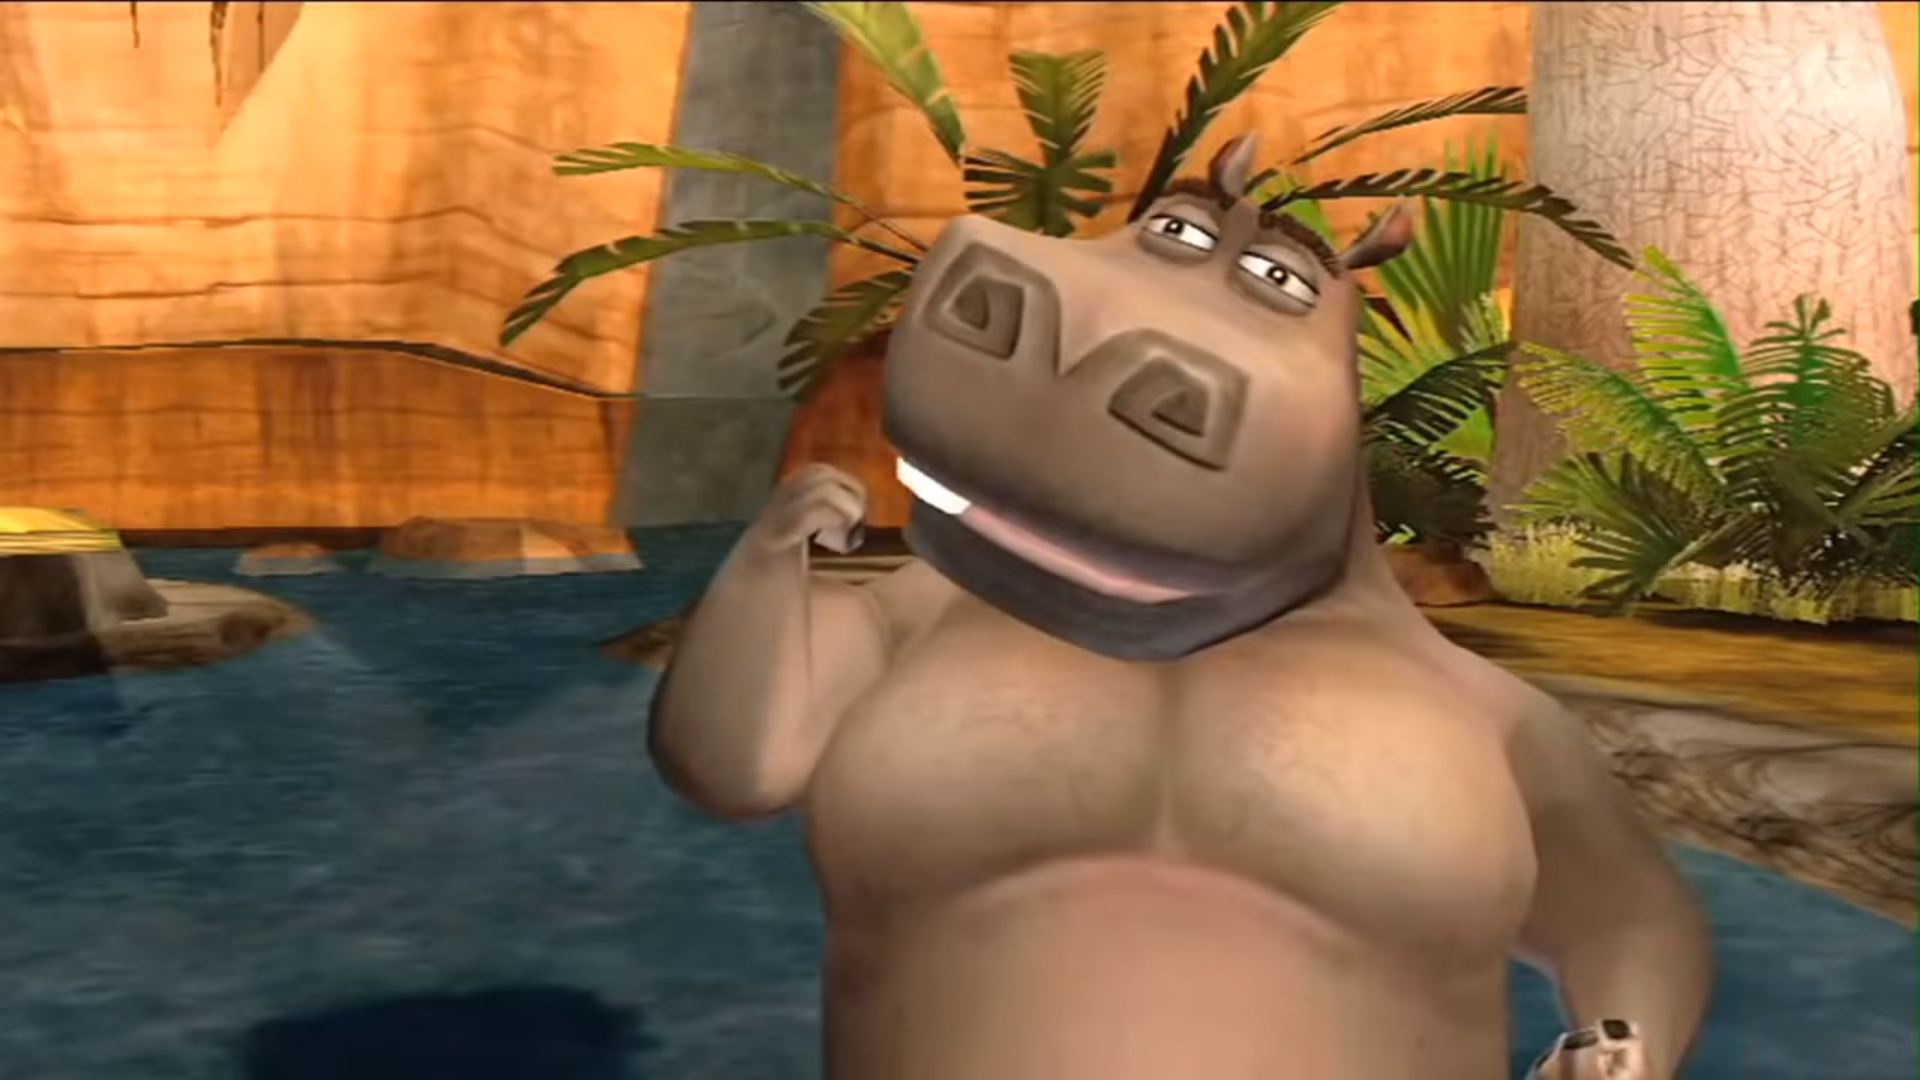 My son secretly played this Madagascar game at his friend's house and now he is gay